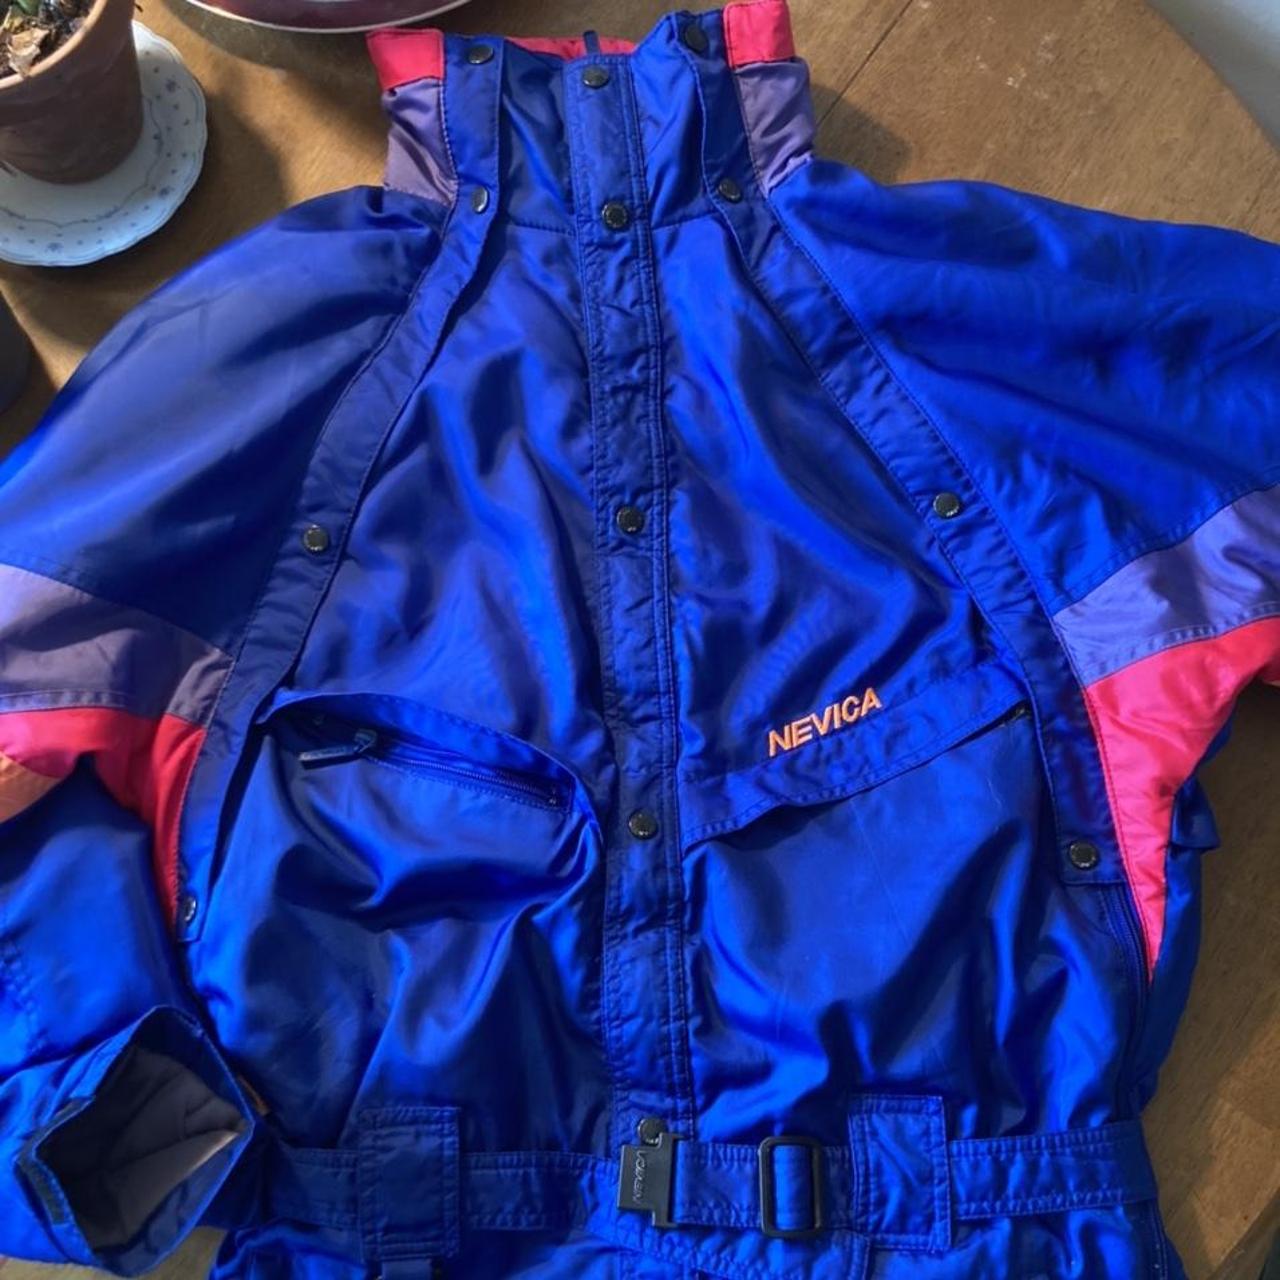 Product Image 2 - VINTAGE SKI SUIT!
❄️🏂❄️⛷❄️🎿❄️🏔❄️🏂❄️⛷❄️🎿
Ultra breathable, water